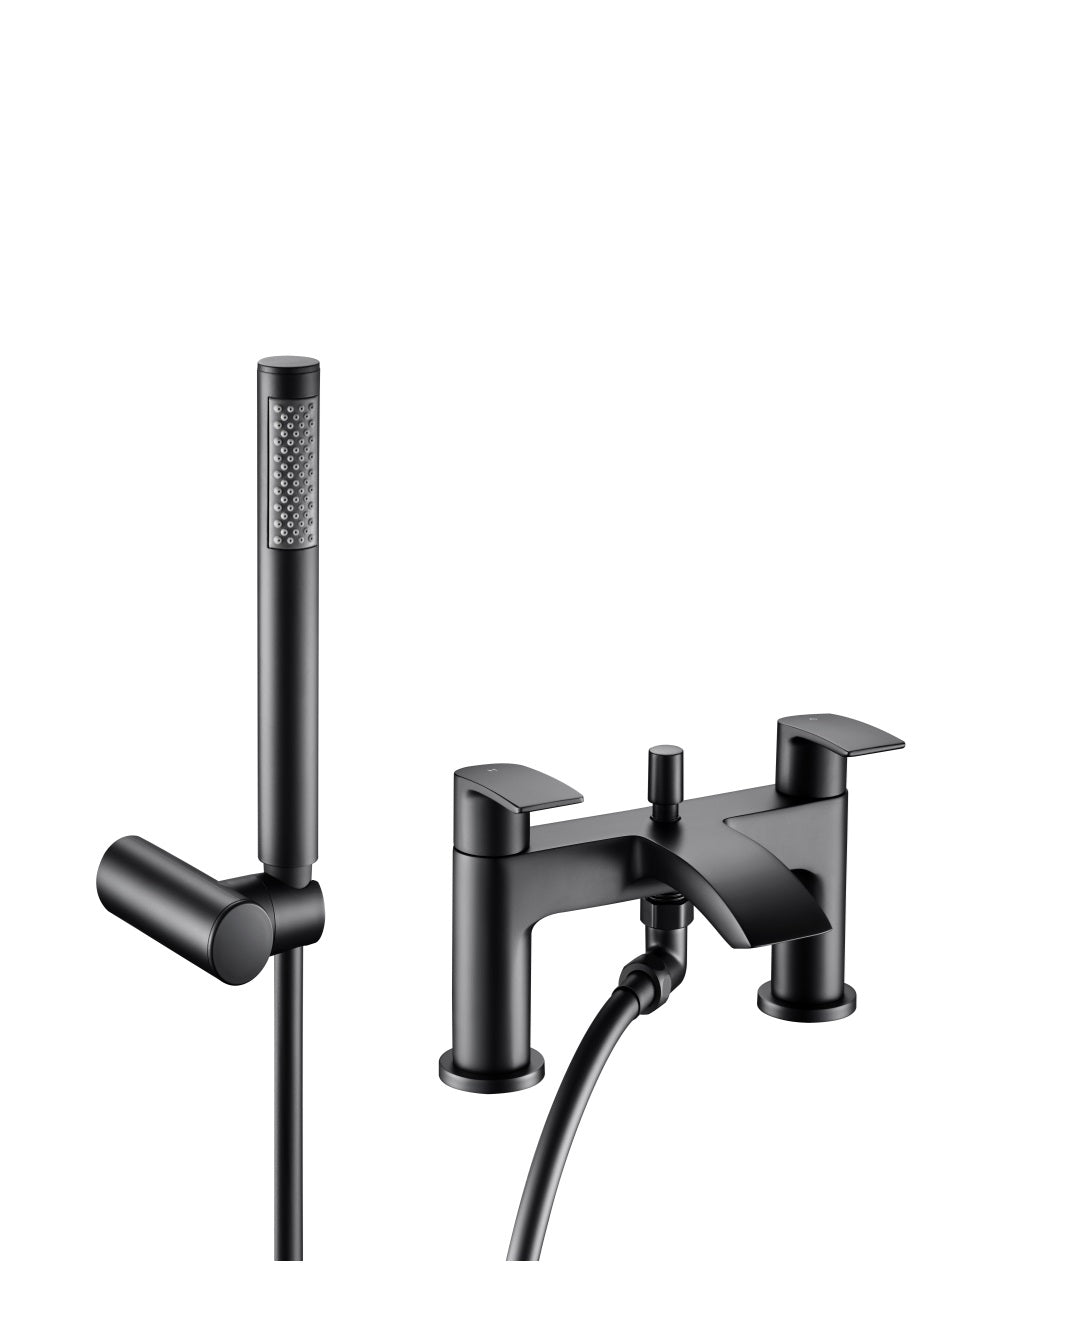 Carter Bath Shower Mixer - Matt Black featuring sleek and modern design, perfect for contemporary bathrooms. This stylish mixer combines functionality with elegance, providing a luxurious bathing experience. Ideal for those seeking high-quality bathroom fixtures in the UK. Available now at bathroom4less.co.uk.